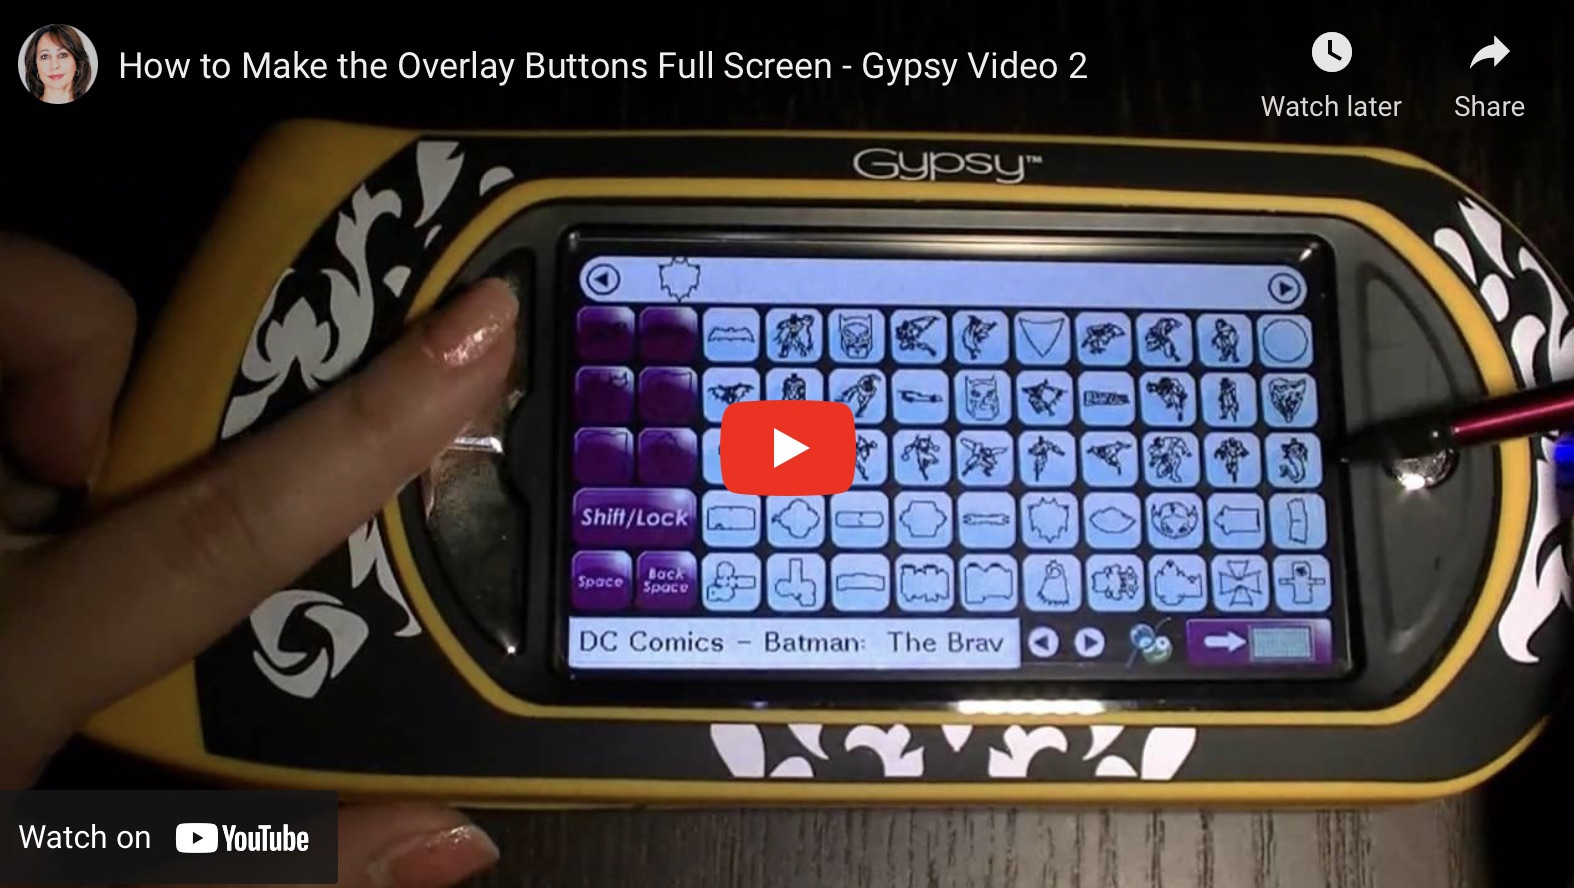 How to Make Overlay Buttons Full Screen – #2 in Gypsy Video Series